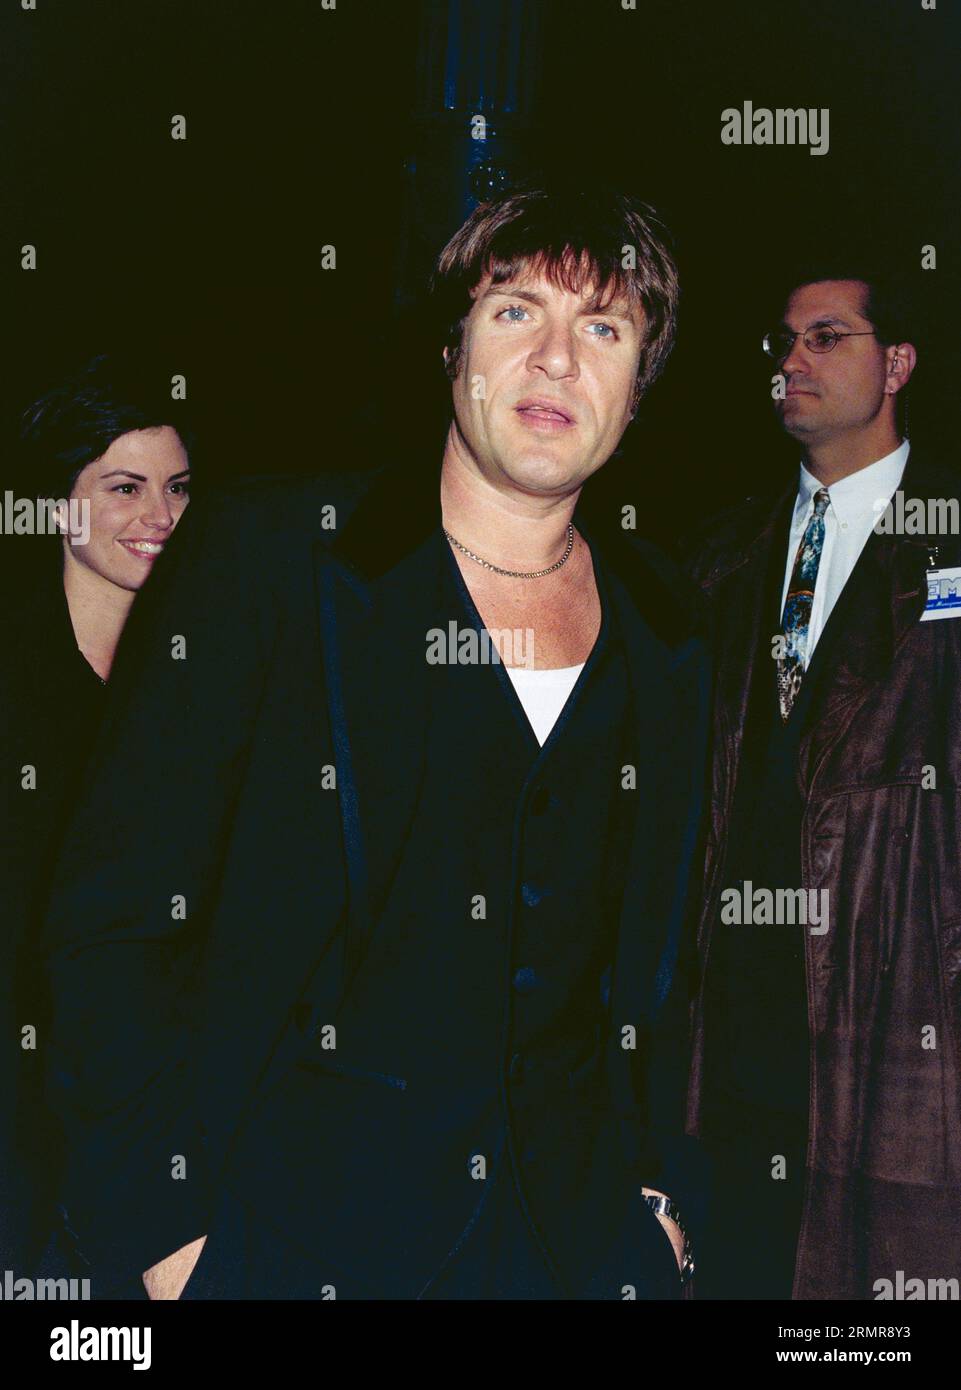 LOS ANGELES, CA. April 3, 1997: Pop star Simon Le Bon at the premiere of “The Saint” at the Academy of Motion Pictures Arts & Sciences. Picture: Paul Smith / Featureflash Stock Photo